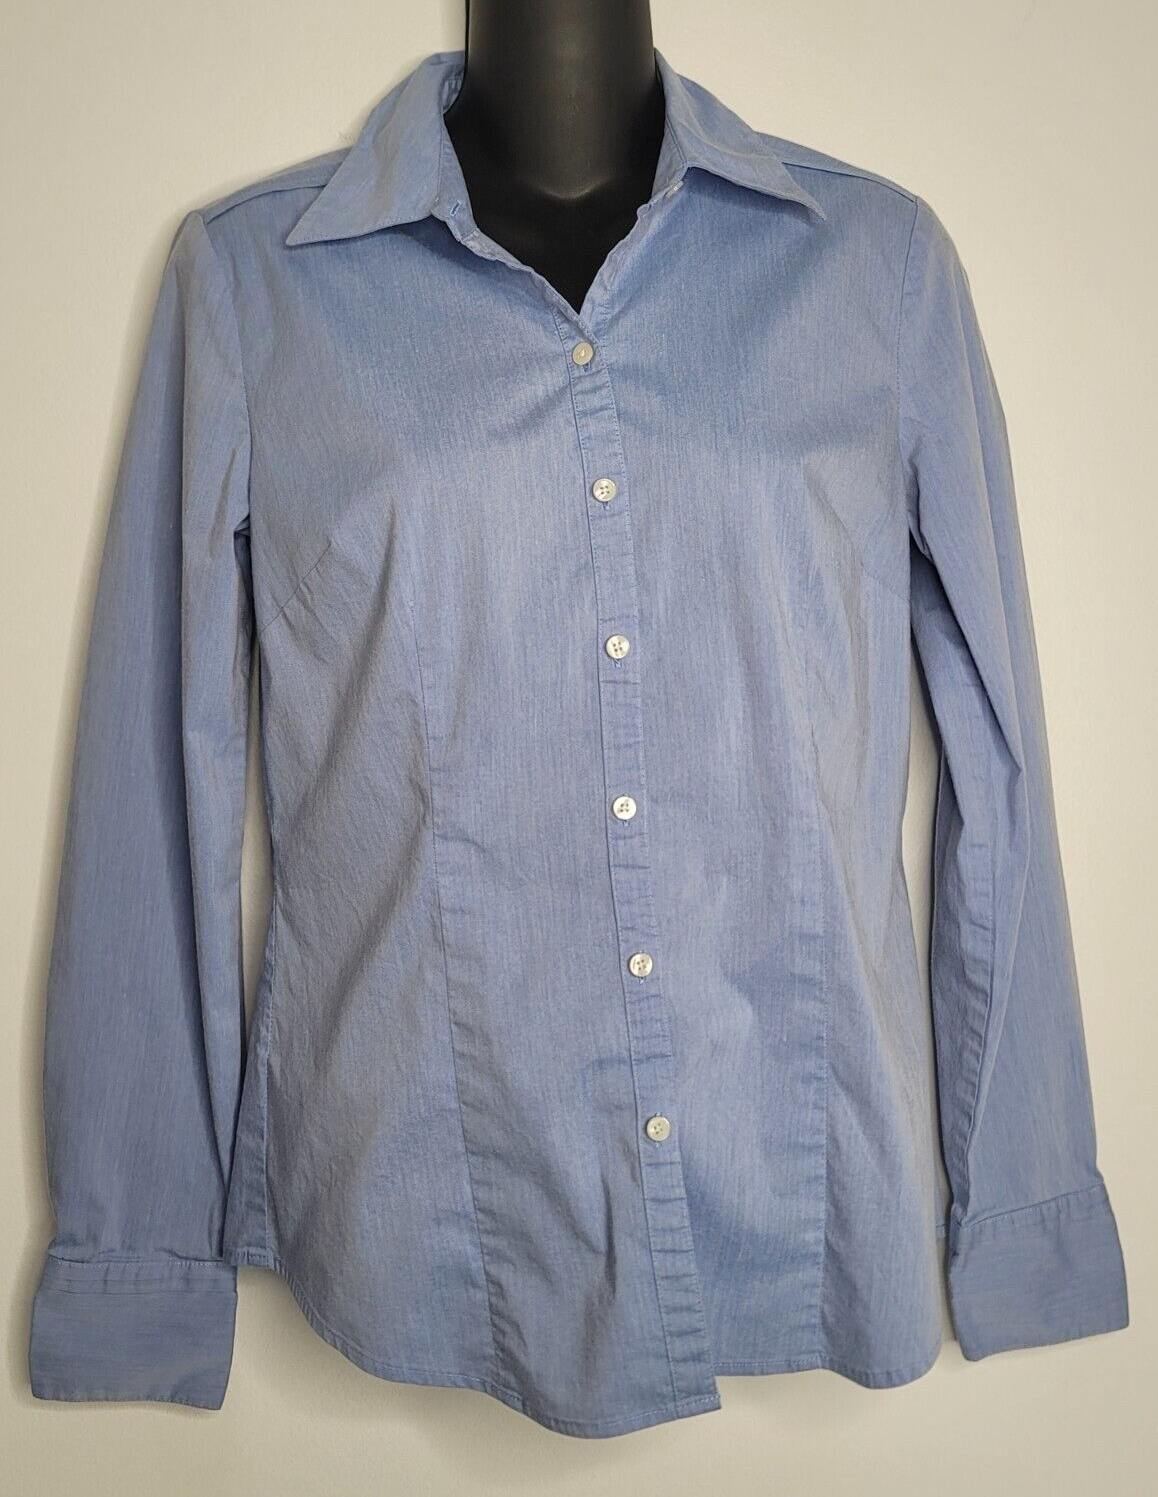 Primary image for Ann Taylor Loft Womens Button Down Chambray Denim Shirt Roll Tab Sleeve Size 4